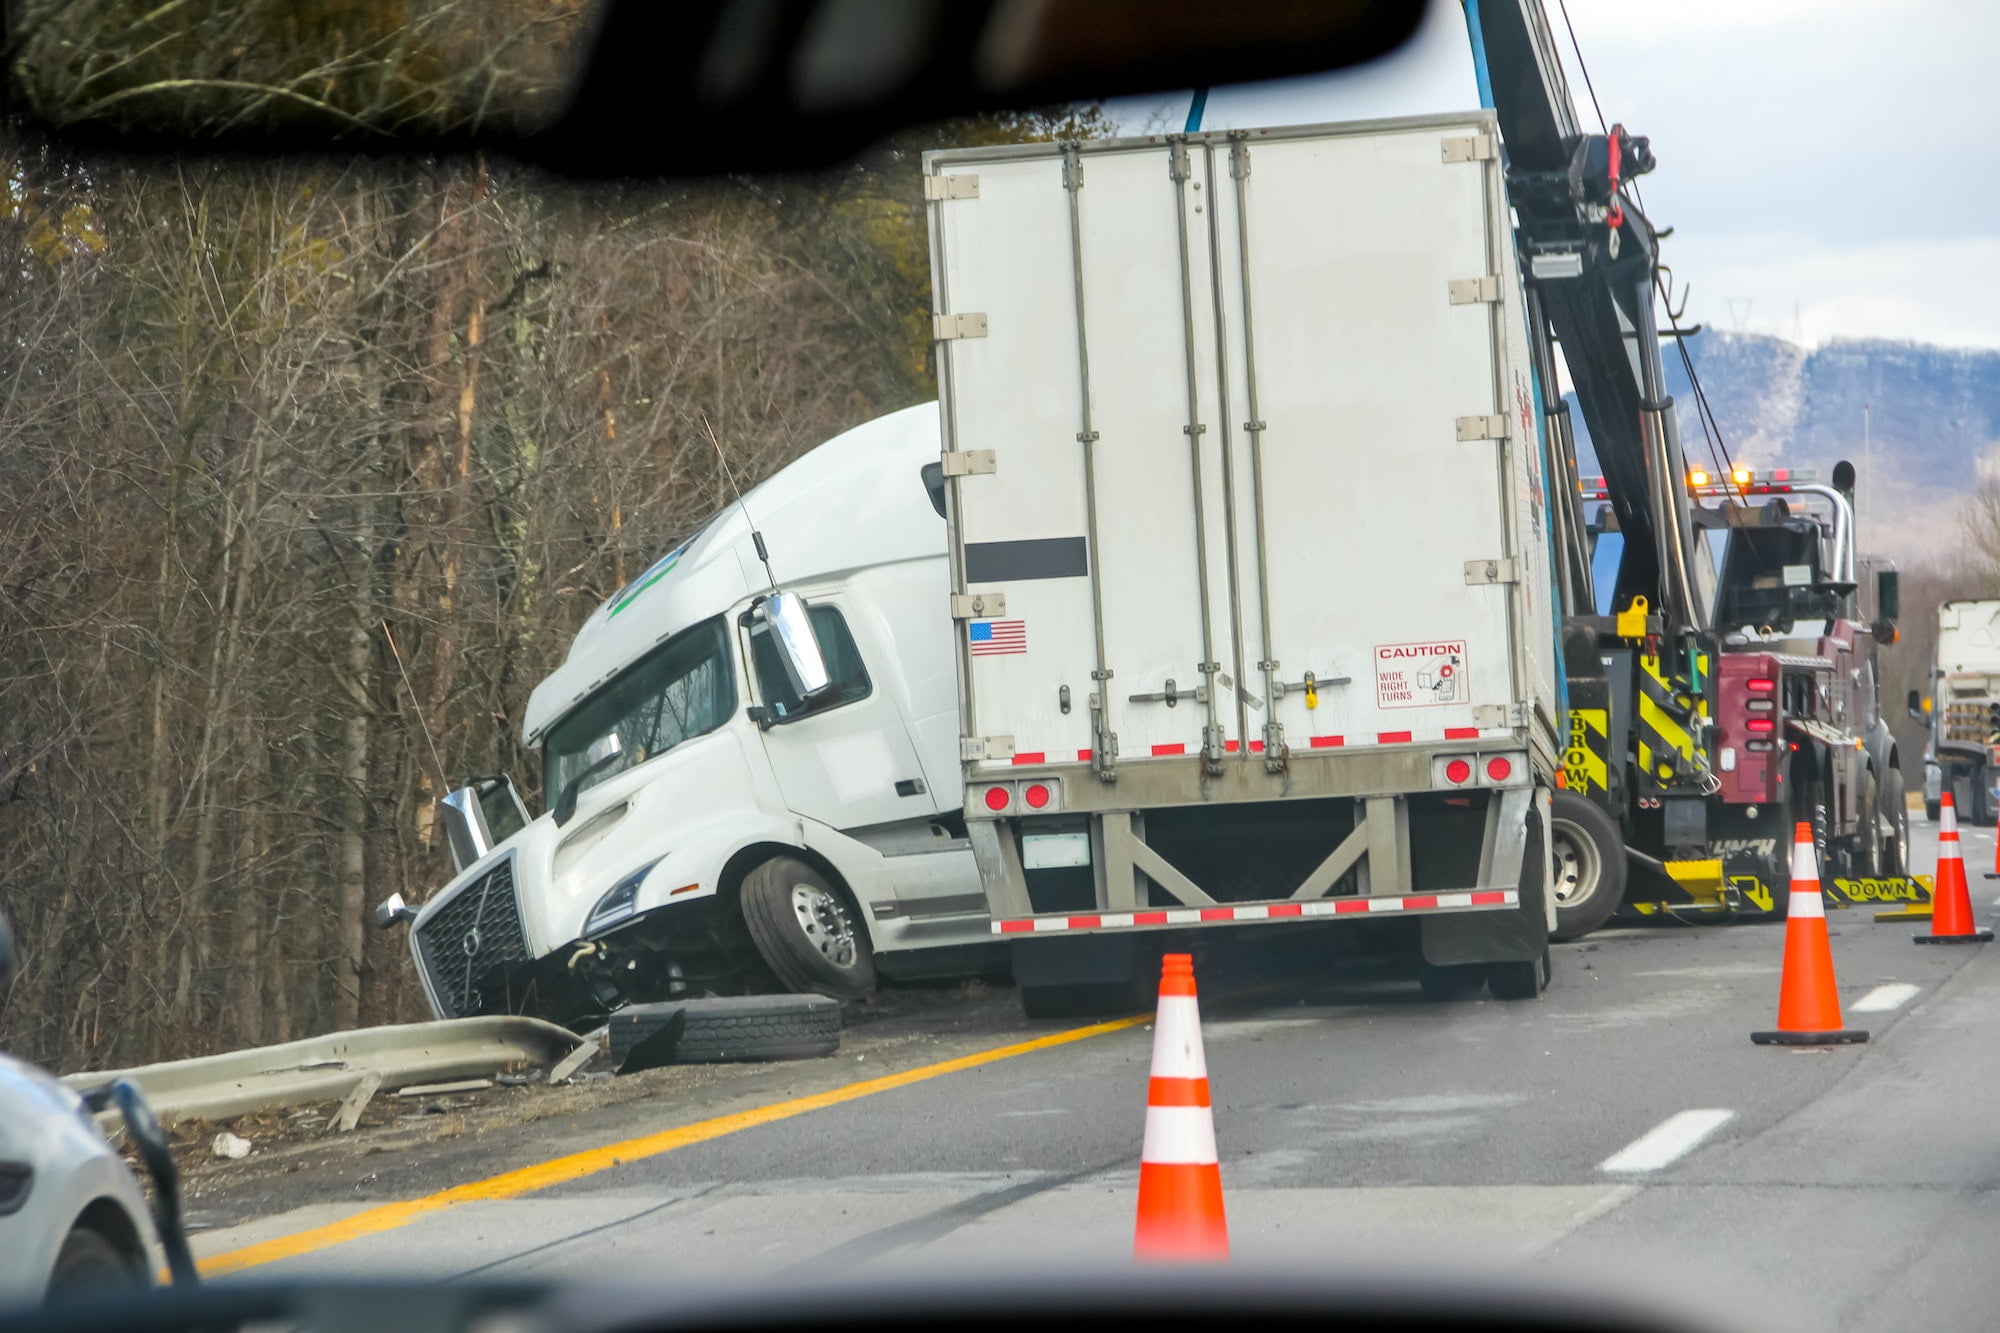 The indiscretion of truck drivers in interstates are the most common cause of fatal accidents in USA